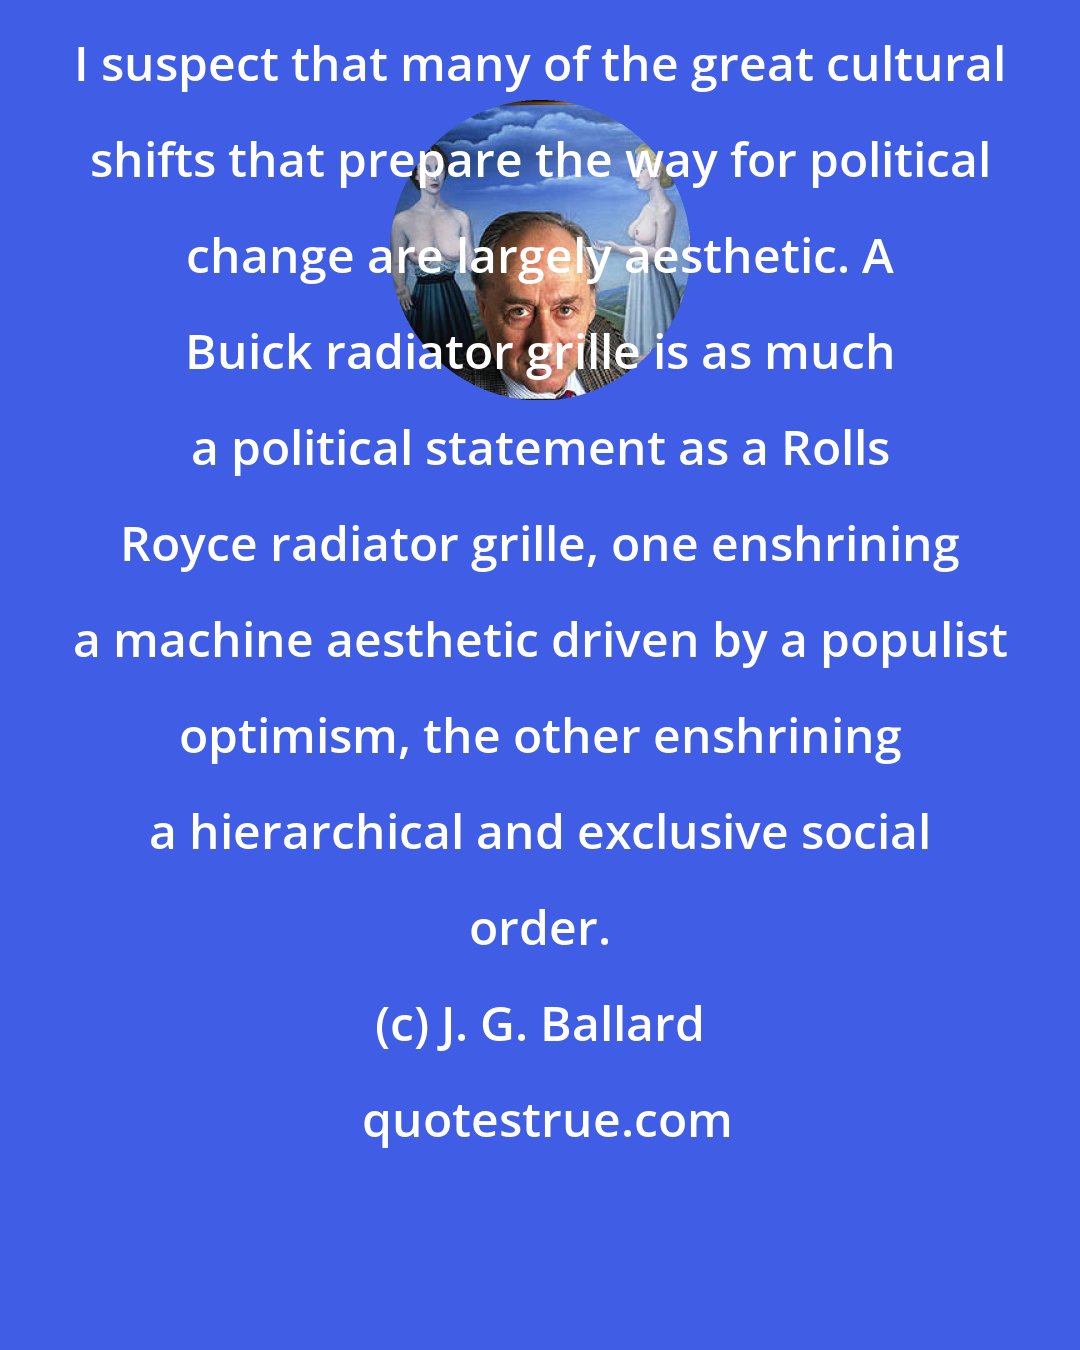 J. G. Ballard: I suspect that many of the great cultural shifts that prepare the way for political change are largely aesthetic. A Buick radiator grille is as much a political statement as a Rolls Royce radiator grille, one enshrining a machine aesthetic driven by a populist optimism, the other enshrining a hierarchical and exclusive social order.